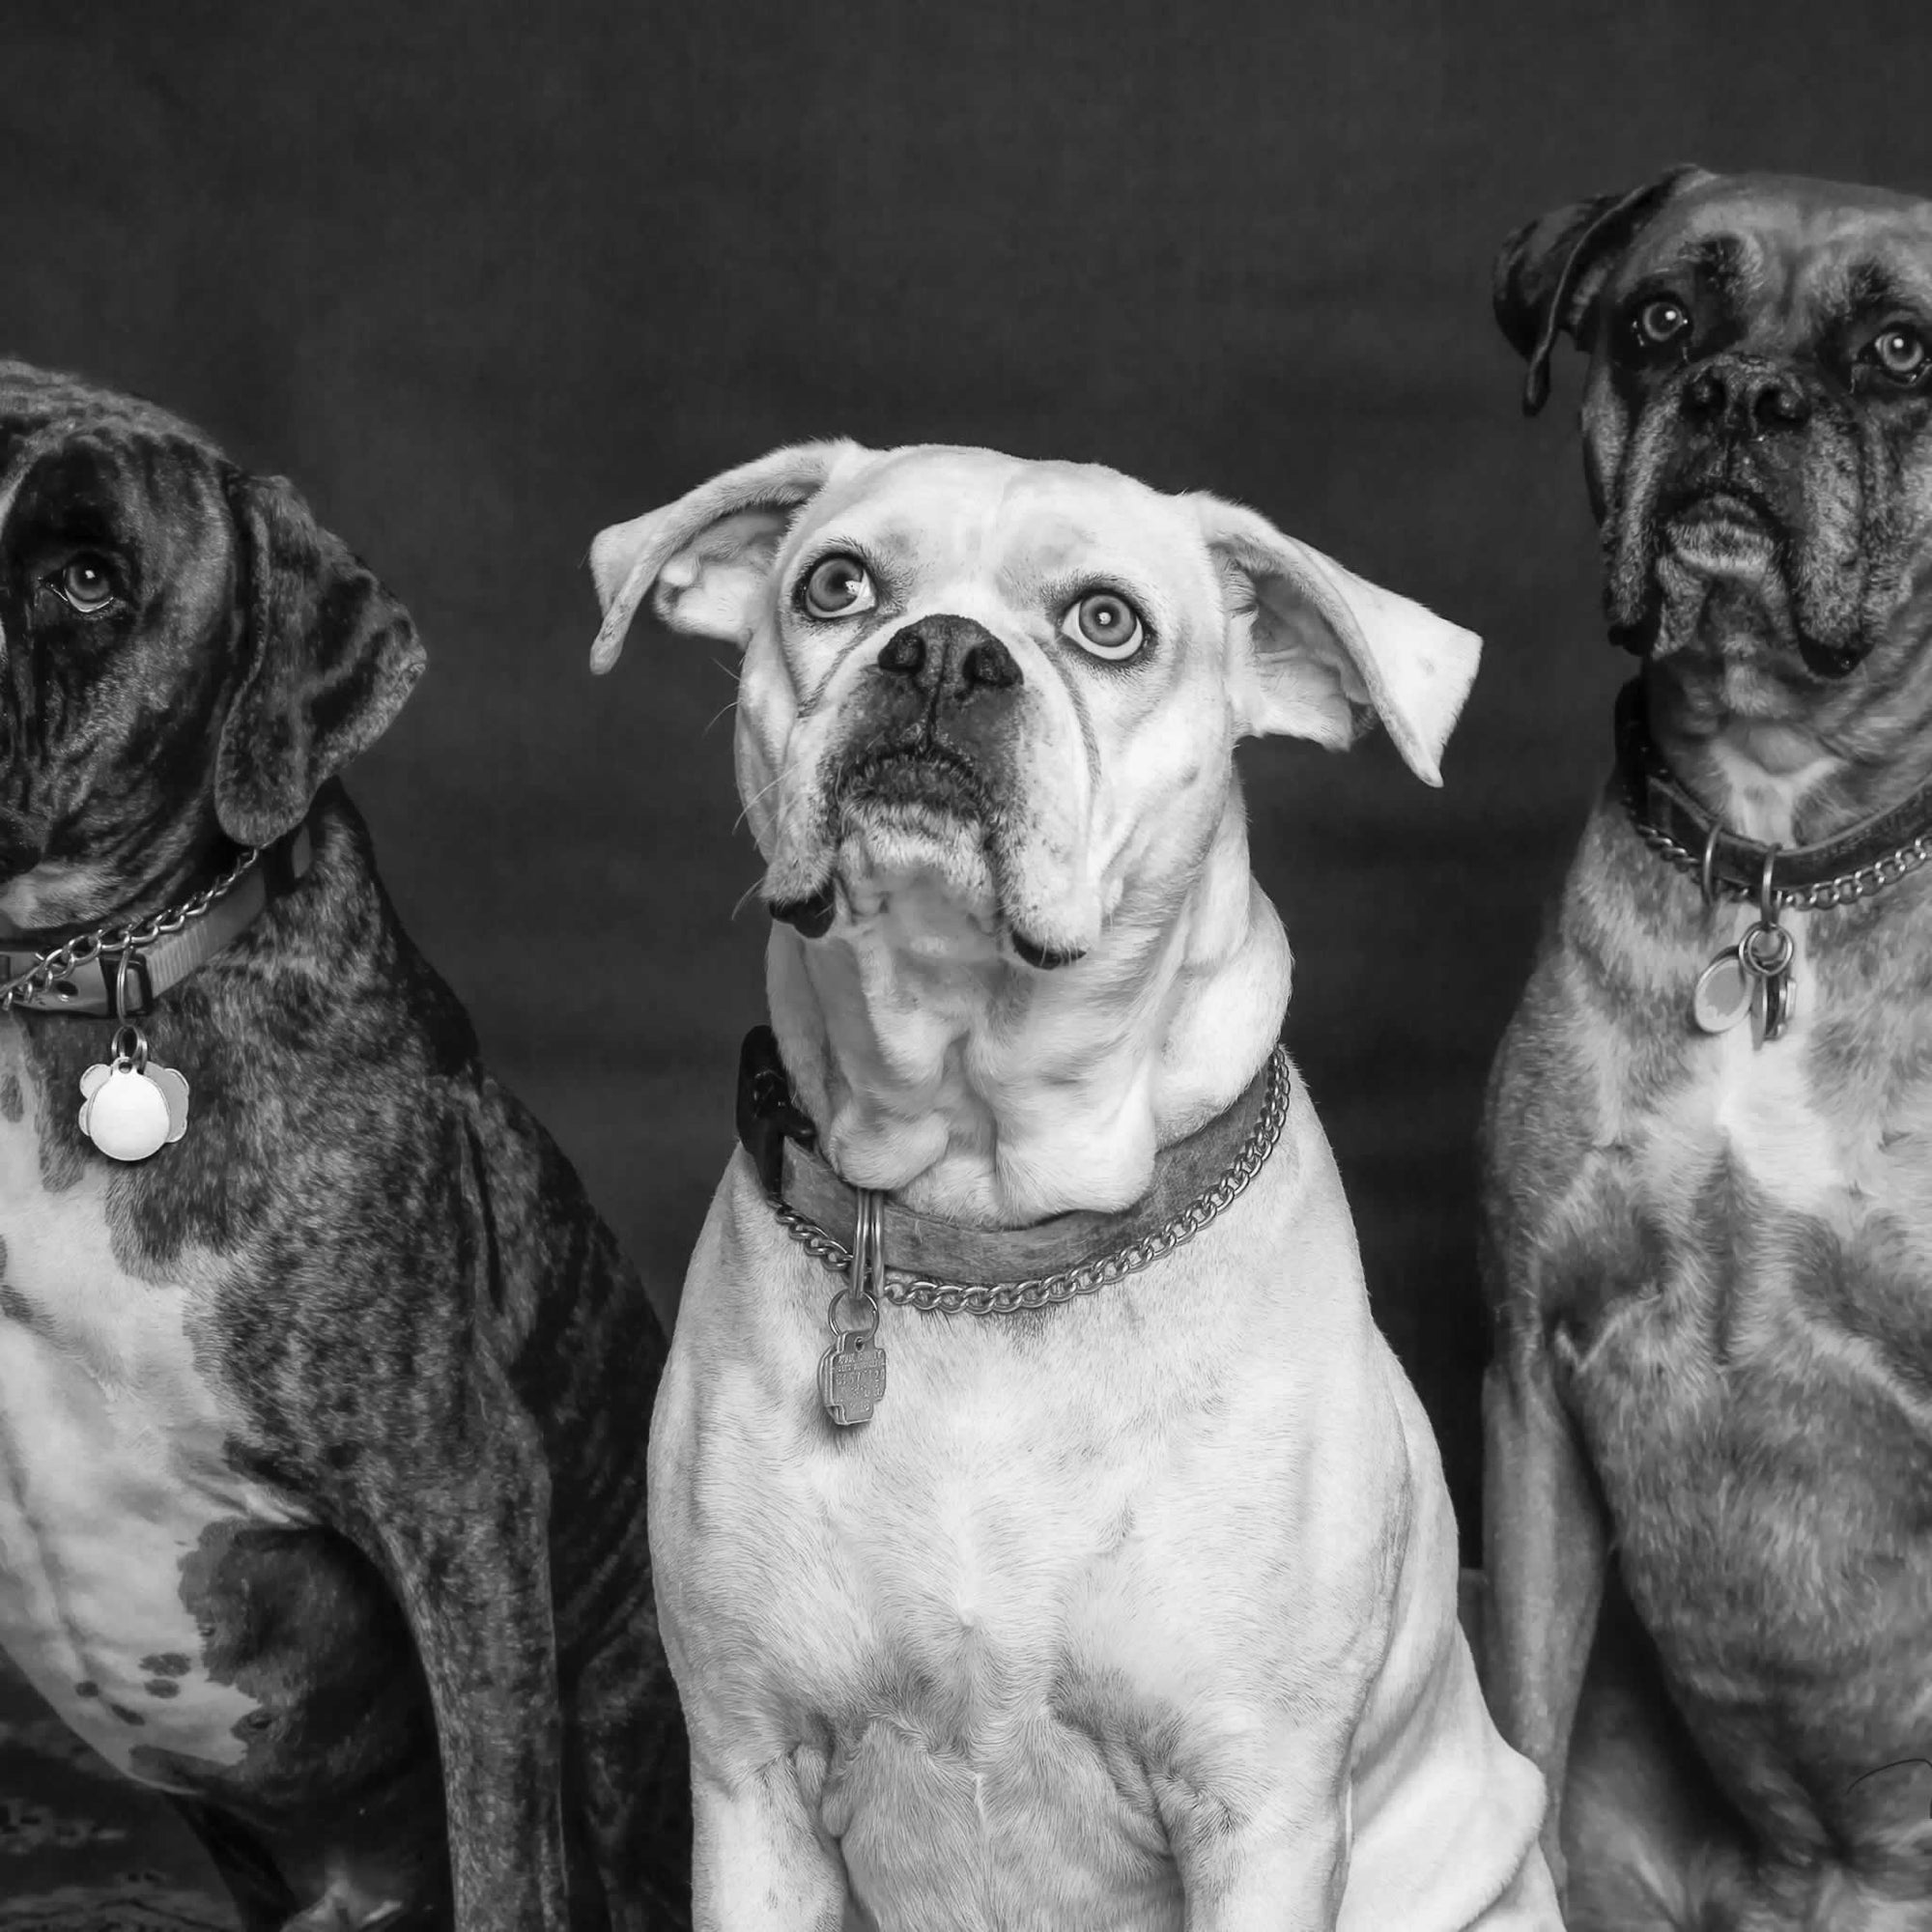 Three dogs sitting attentively shown in black and white.